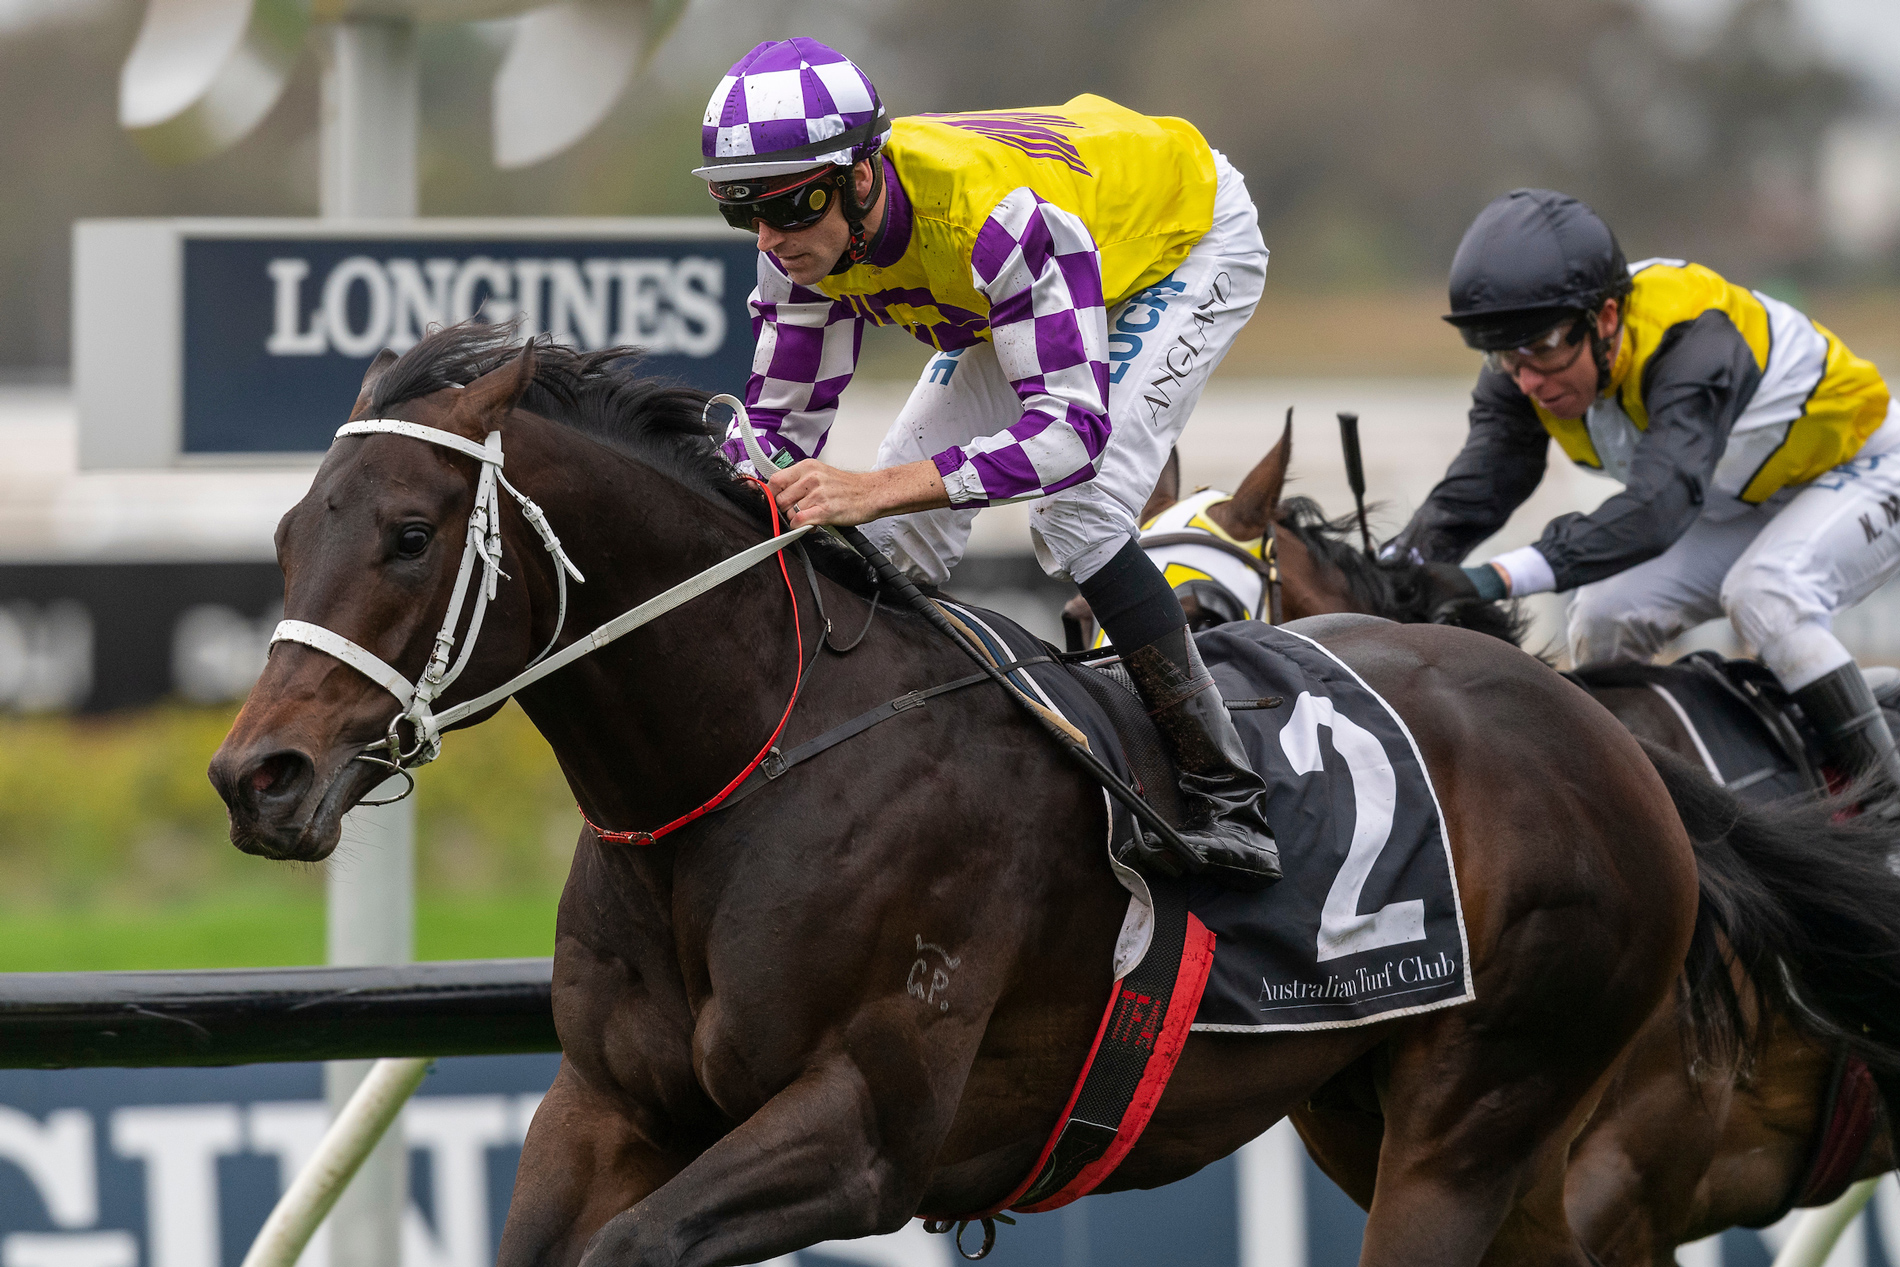 https://www.stallions.com.au/wp-content/uploads/2019/09/Lean-Mean-Machine-Run-To-The-Rose-by-web.jpg